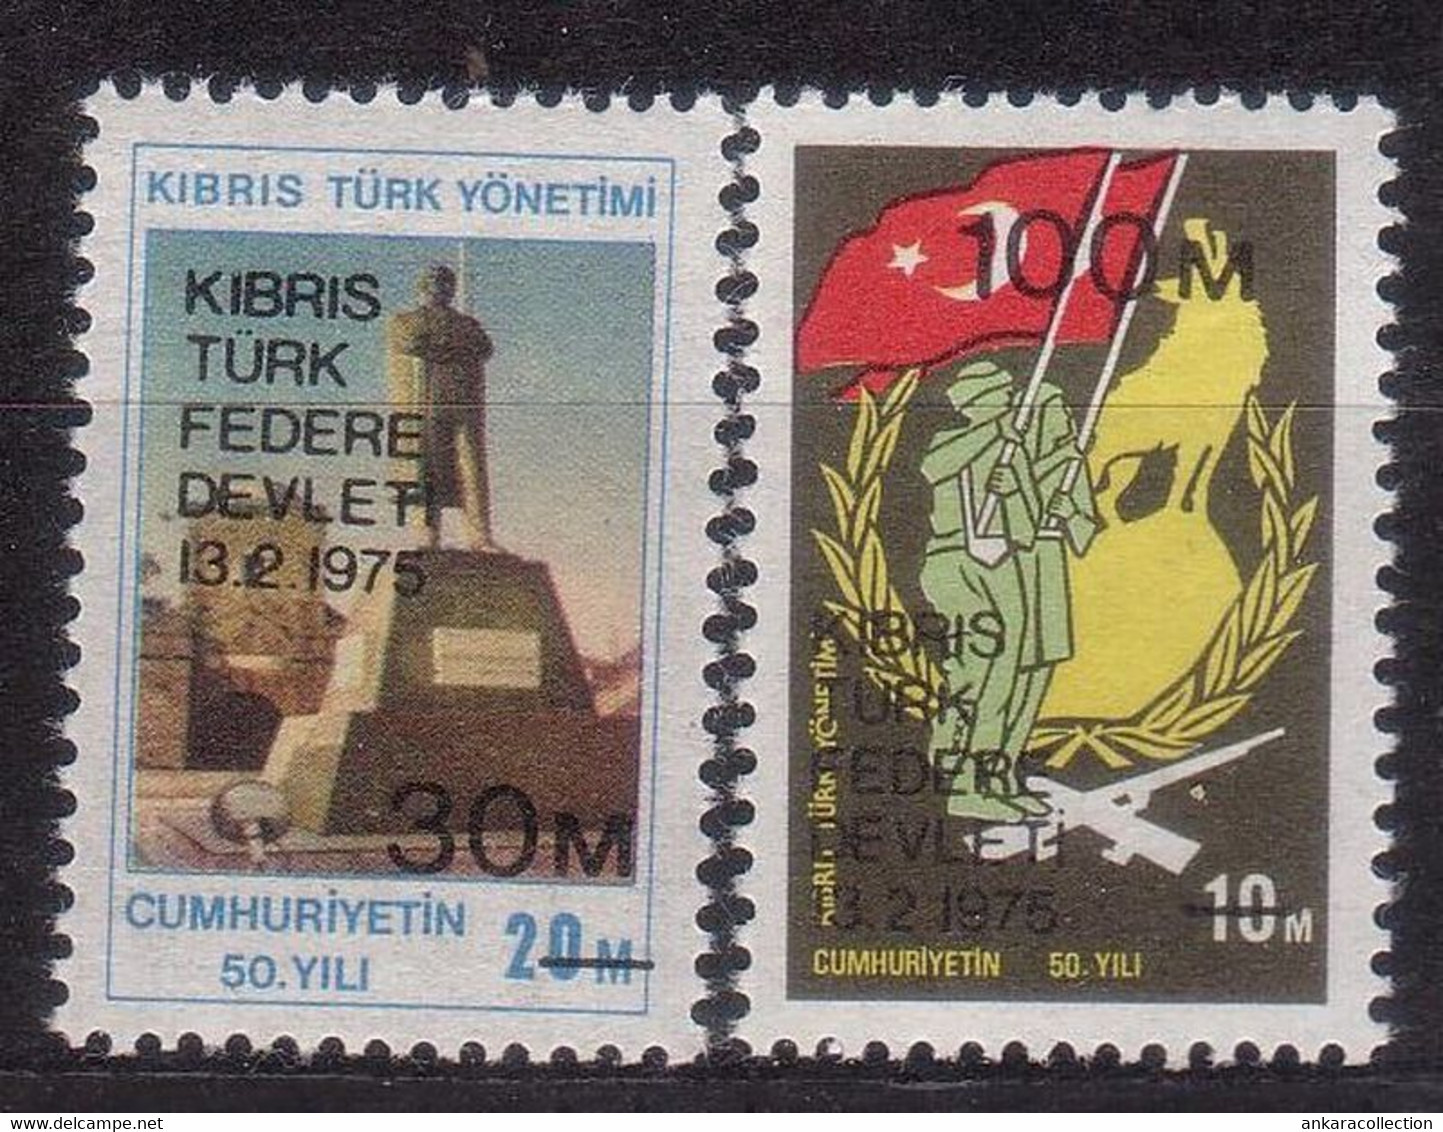 AC - NORTHERN CYPRUS STAMP - FOUNDATION OF FEDERAL STATE OF TURKISH CYPRUS MNH 03 MARCH 1975 - Neufs